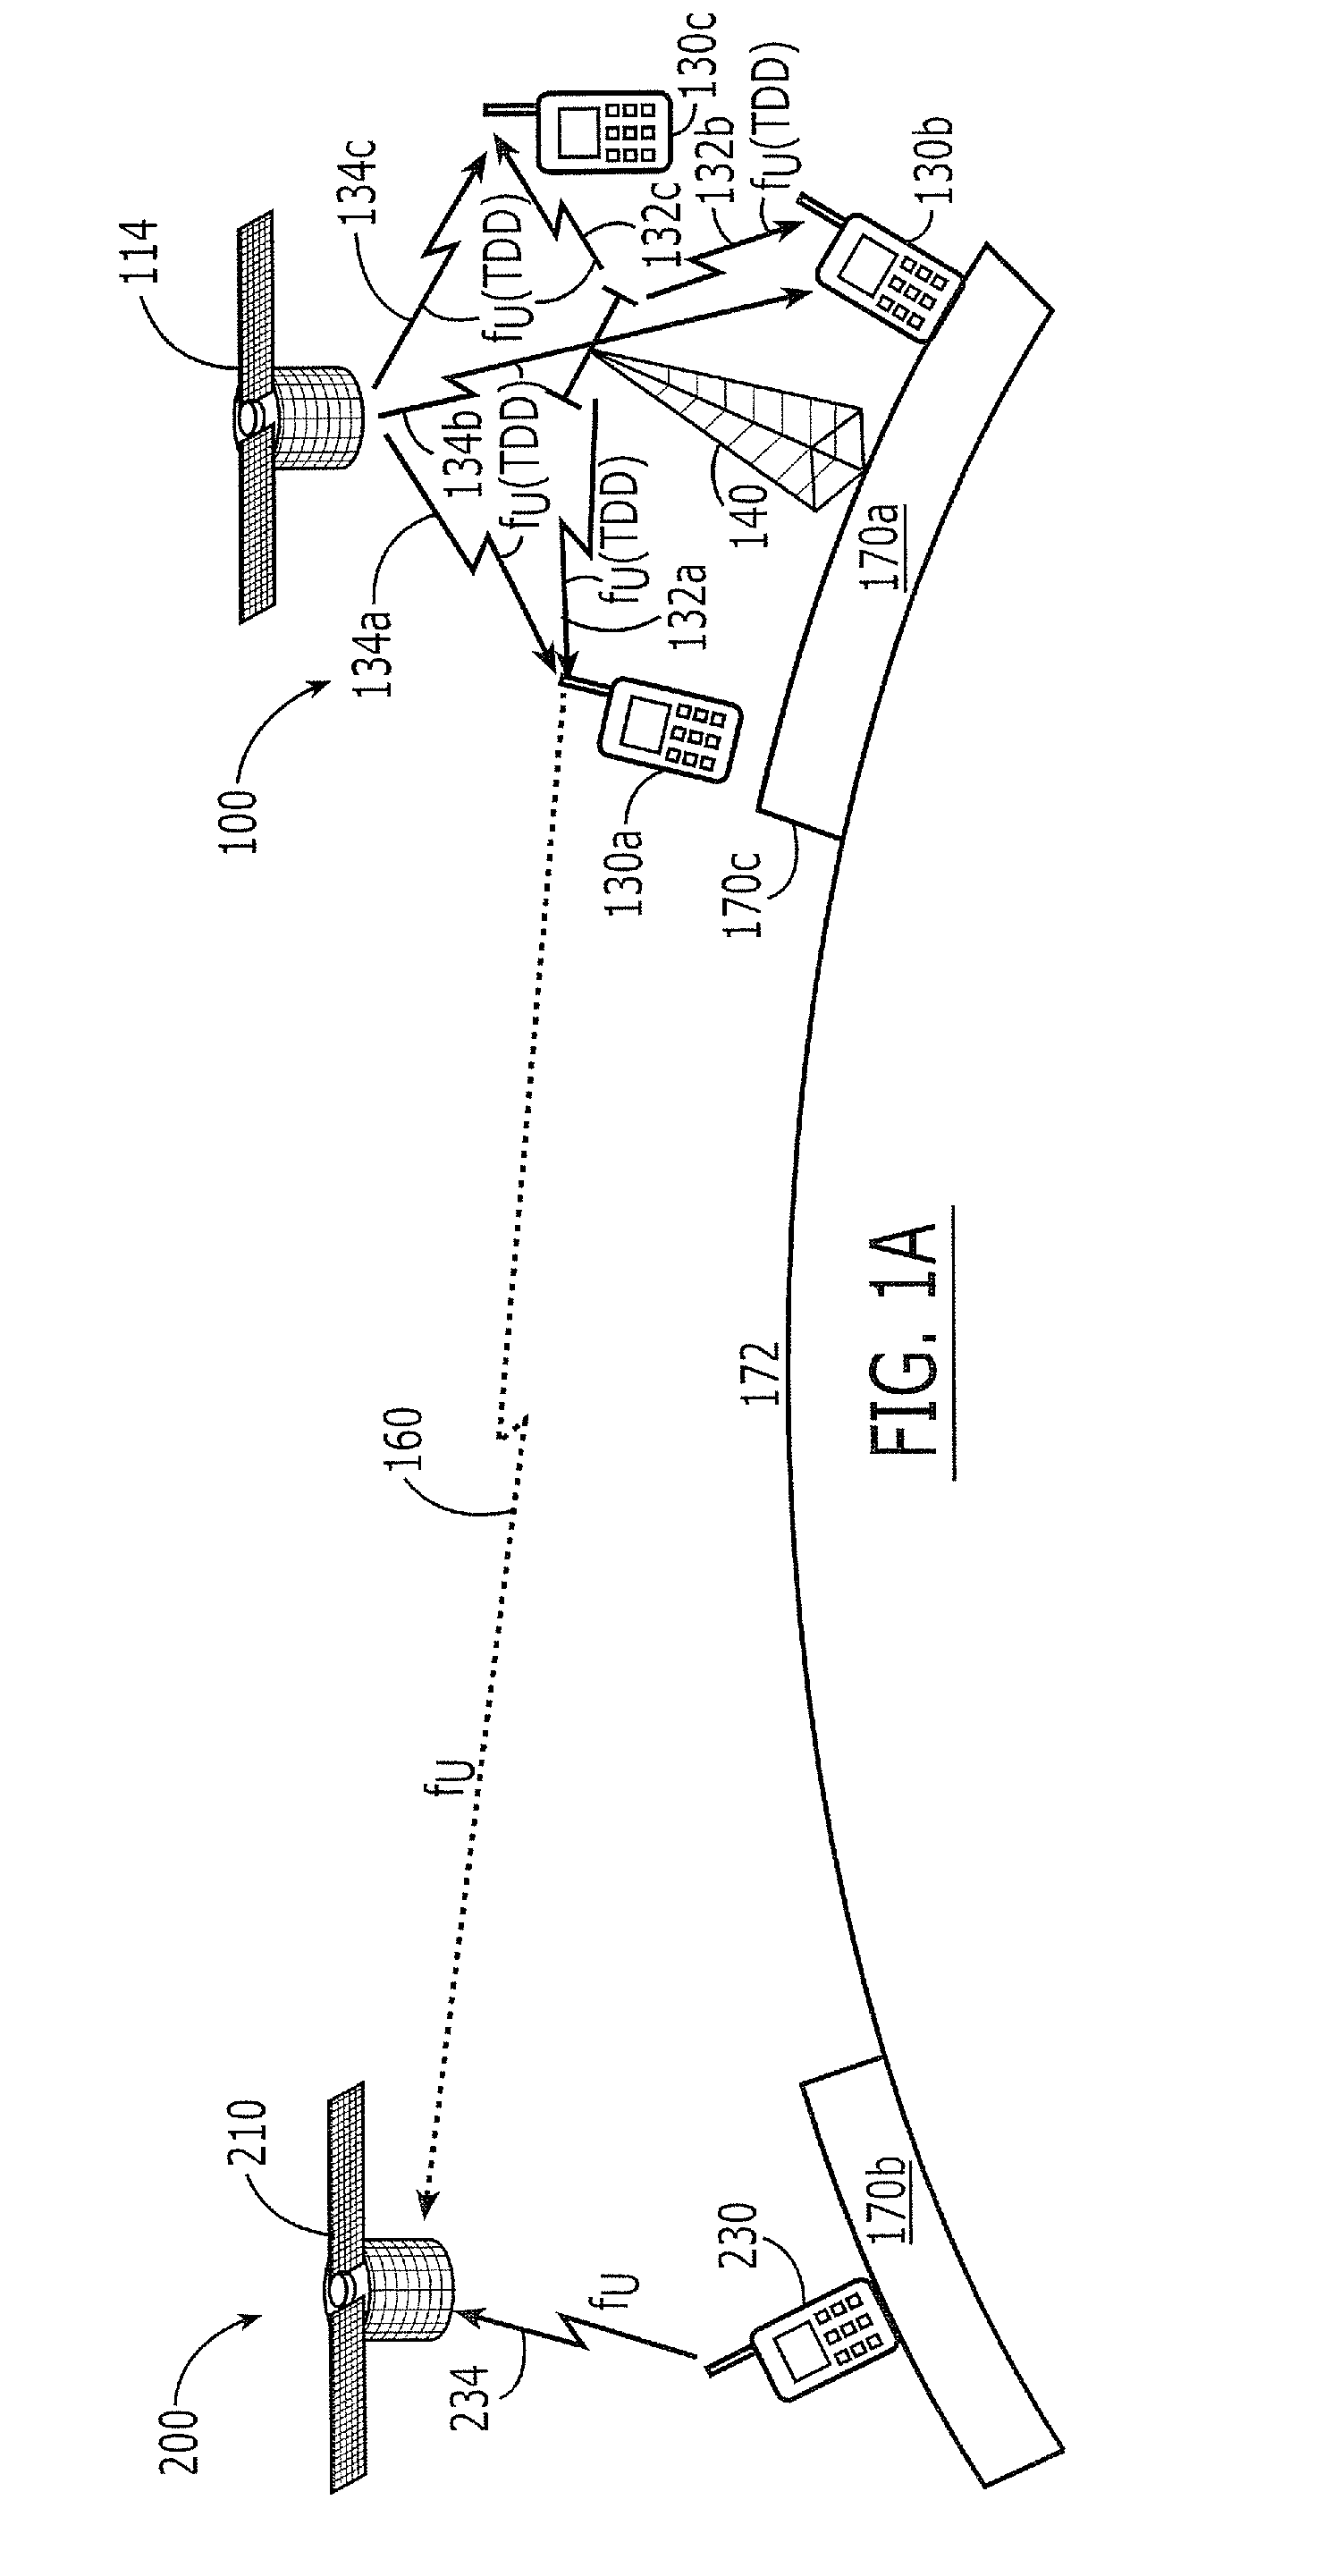 Systems and methods for controlling base station sectors to reduce potential interference with low elevation satellites